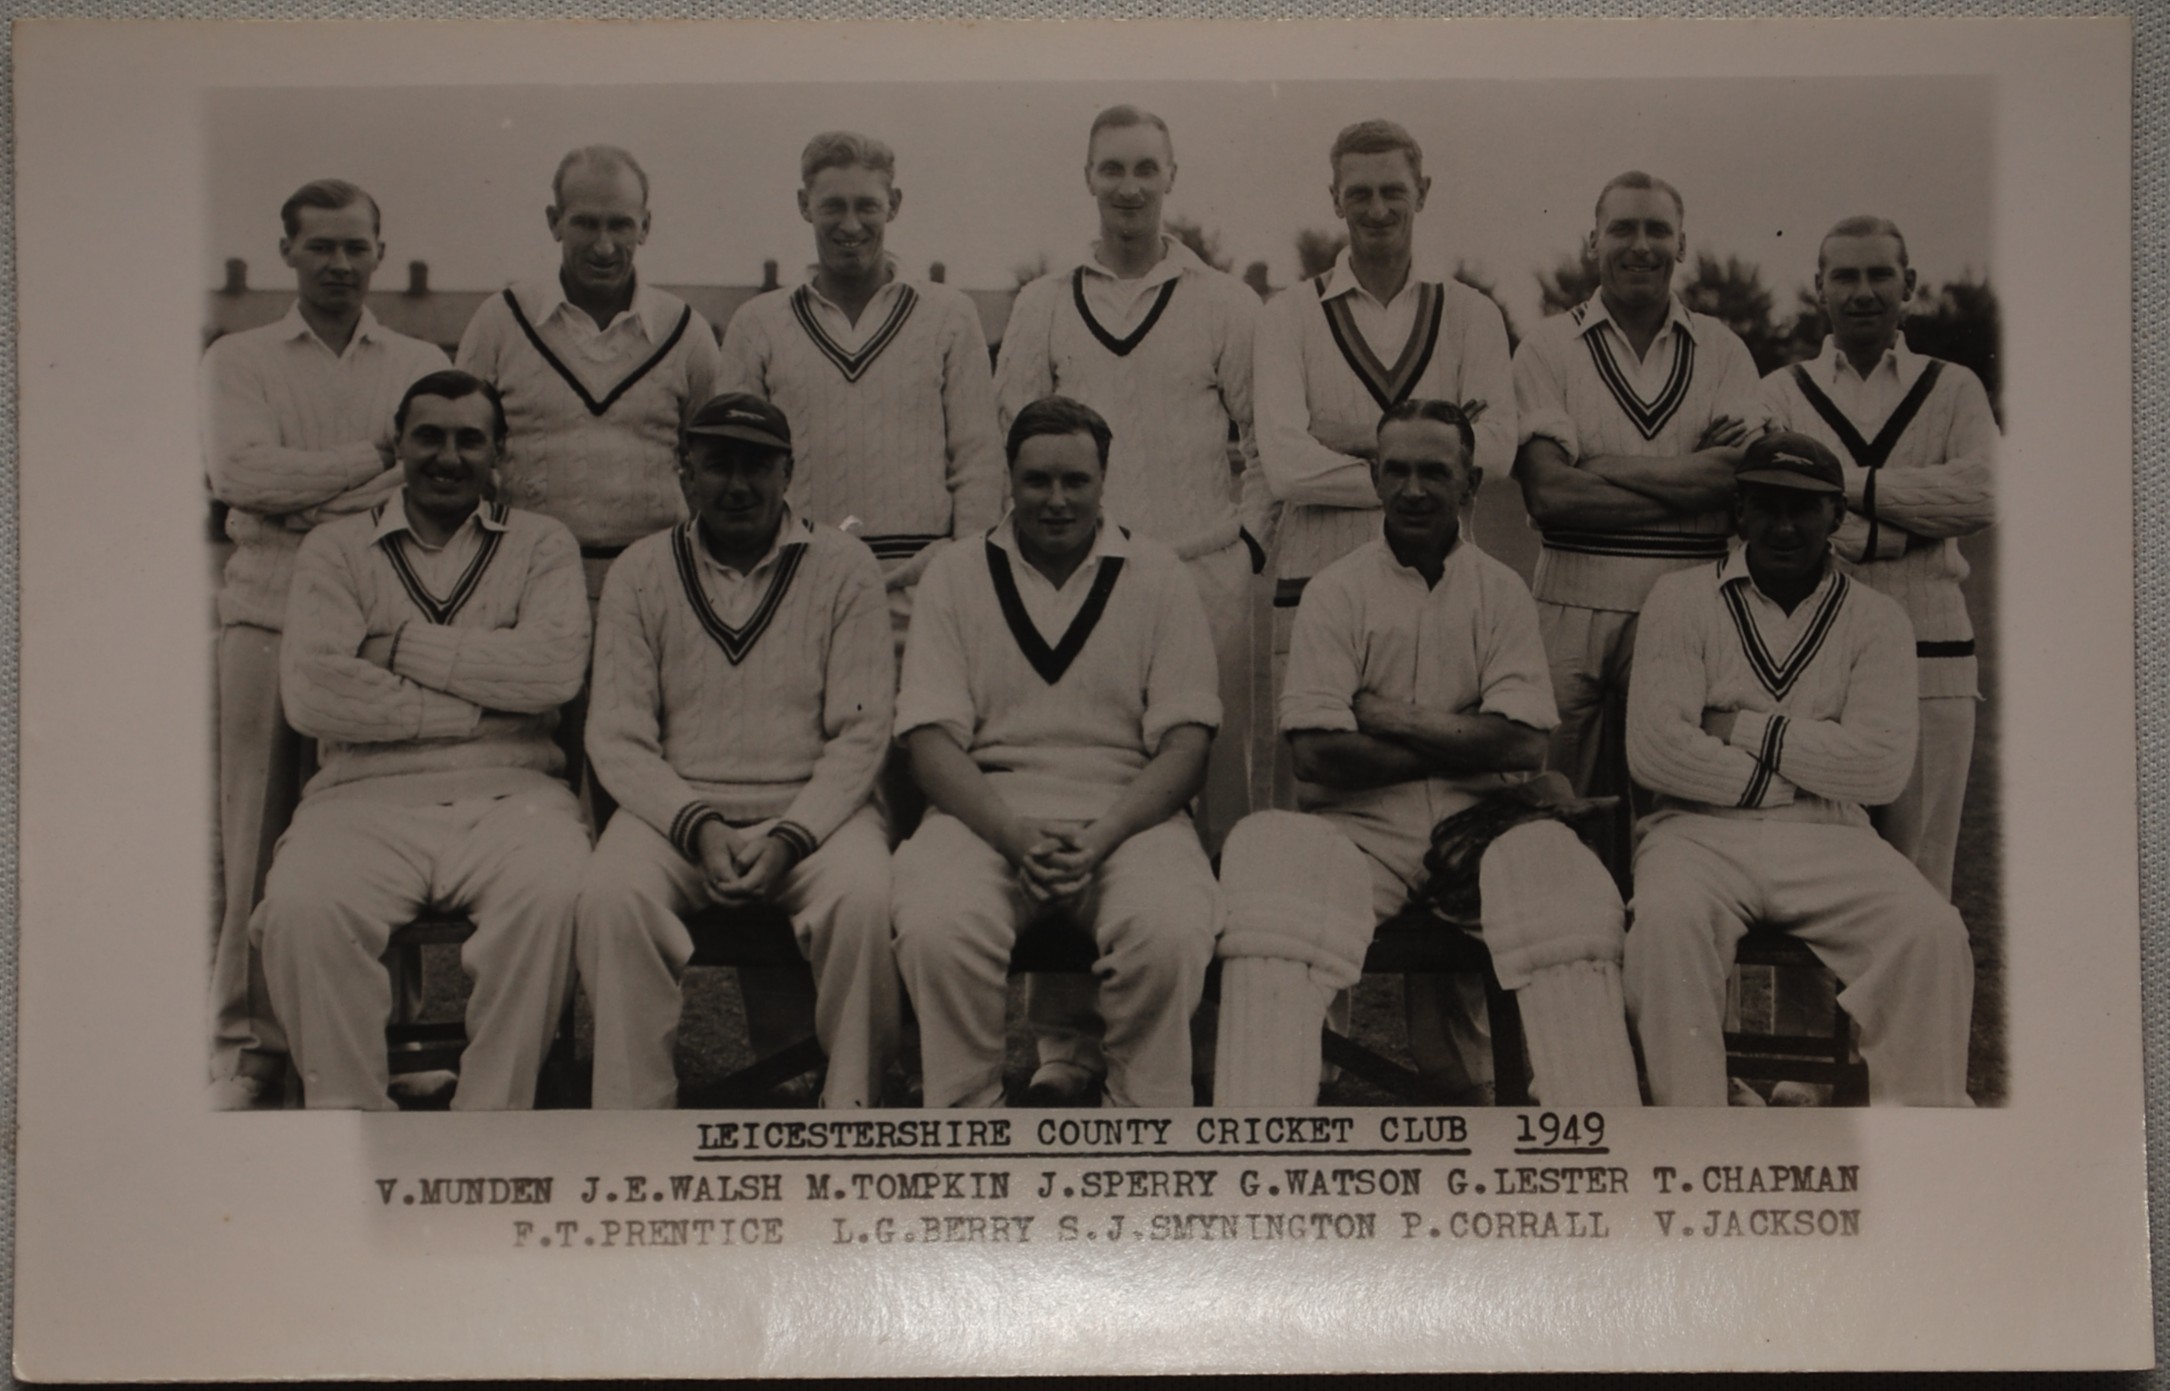 Leicestershire C.C.C. 1949. Excellent mono real photograph plain back postcard of the team seated